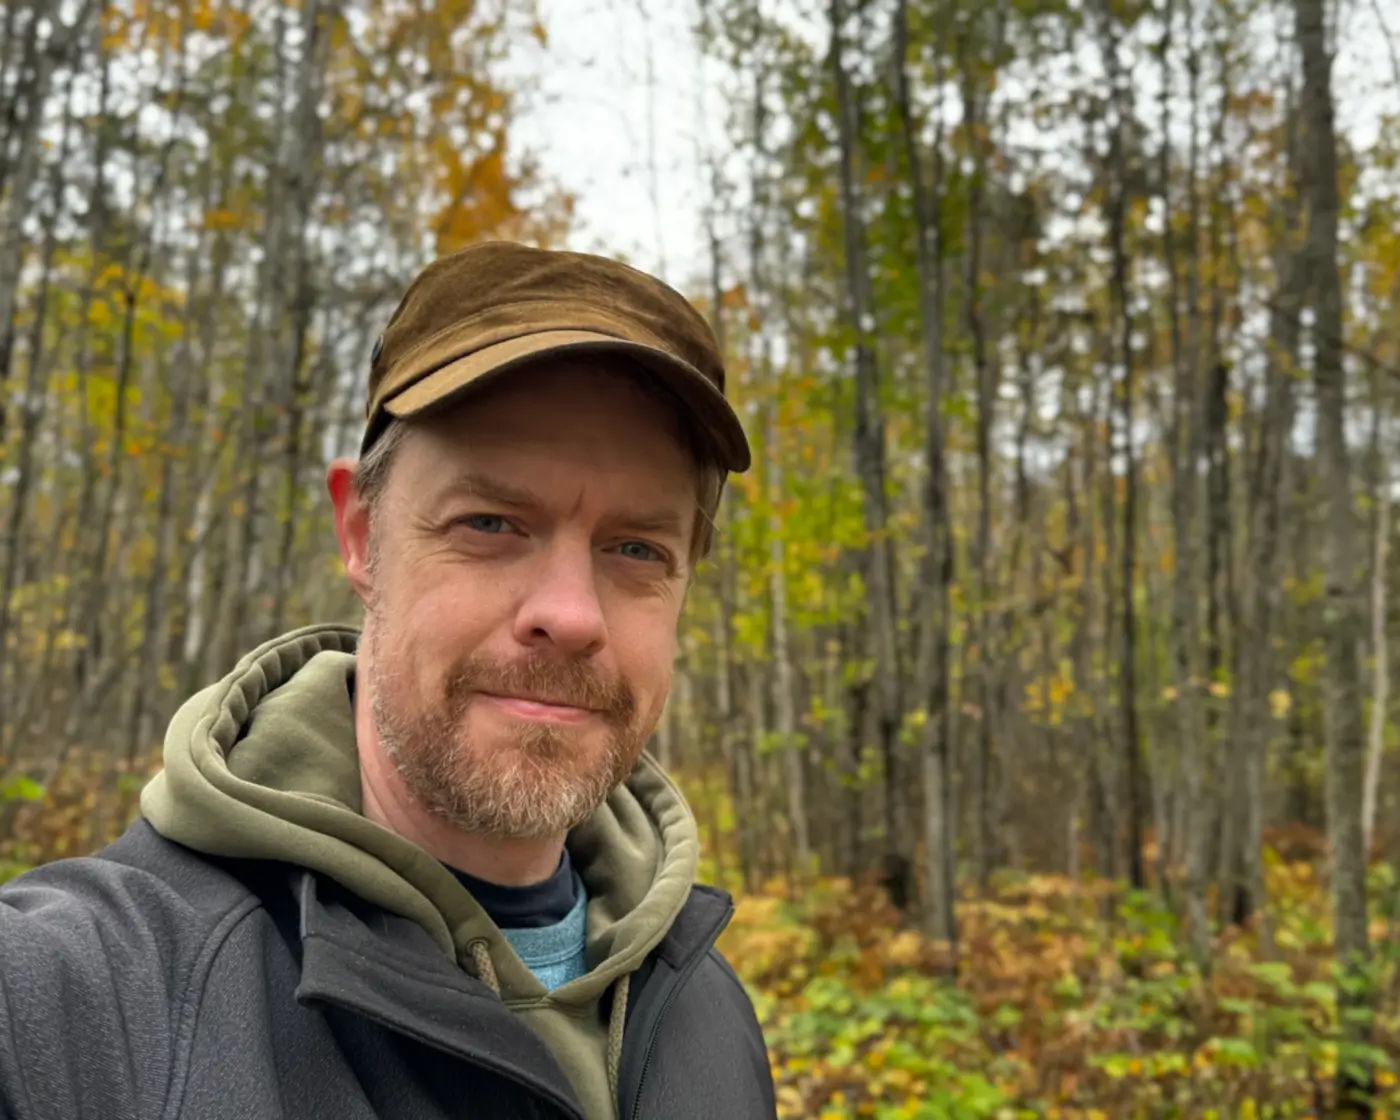 Selfie of the author in the woods, wearing a green cap and a hoodie under a black jacket